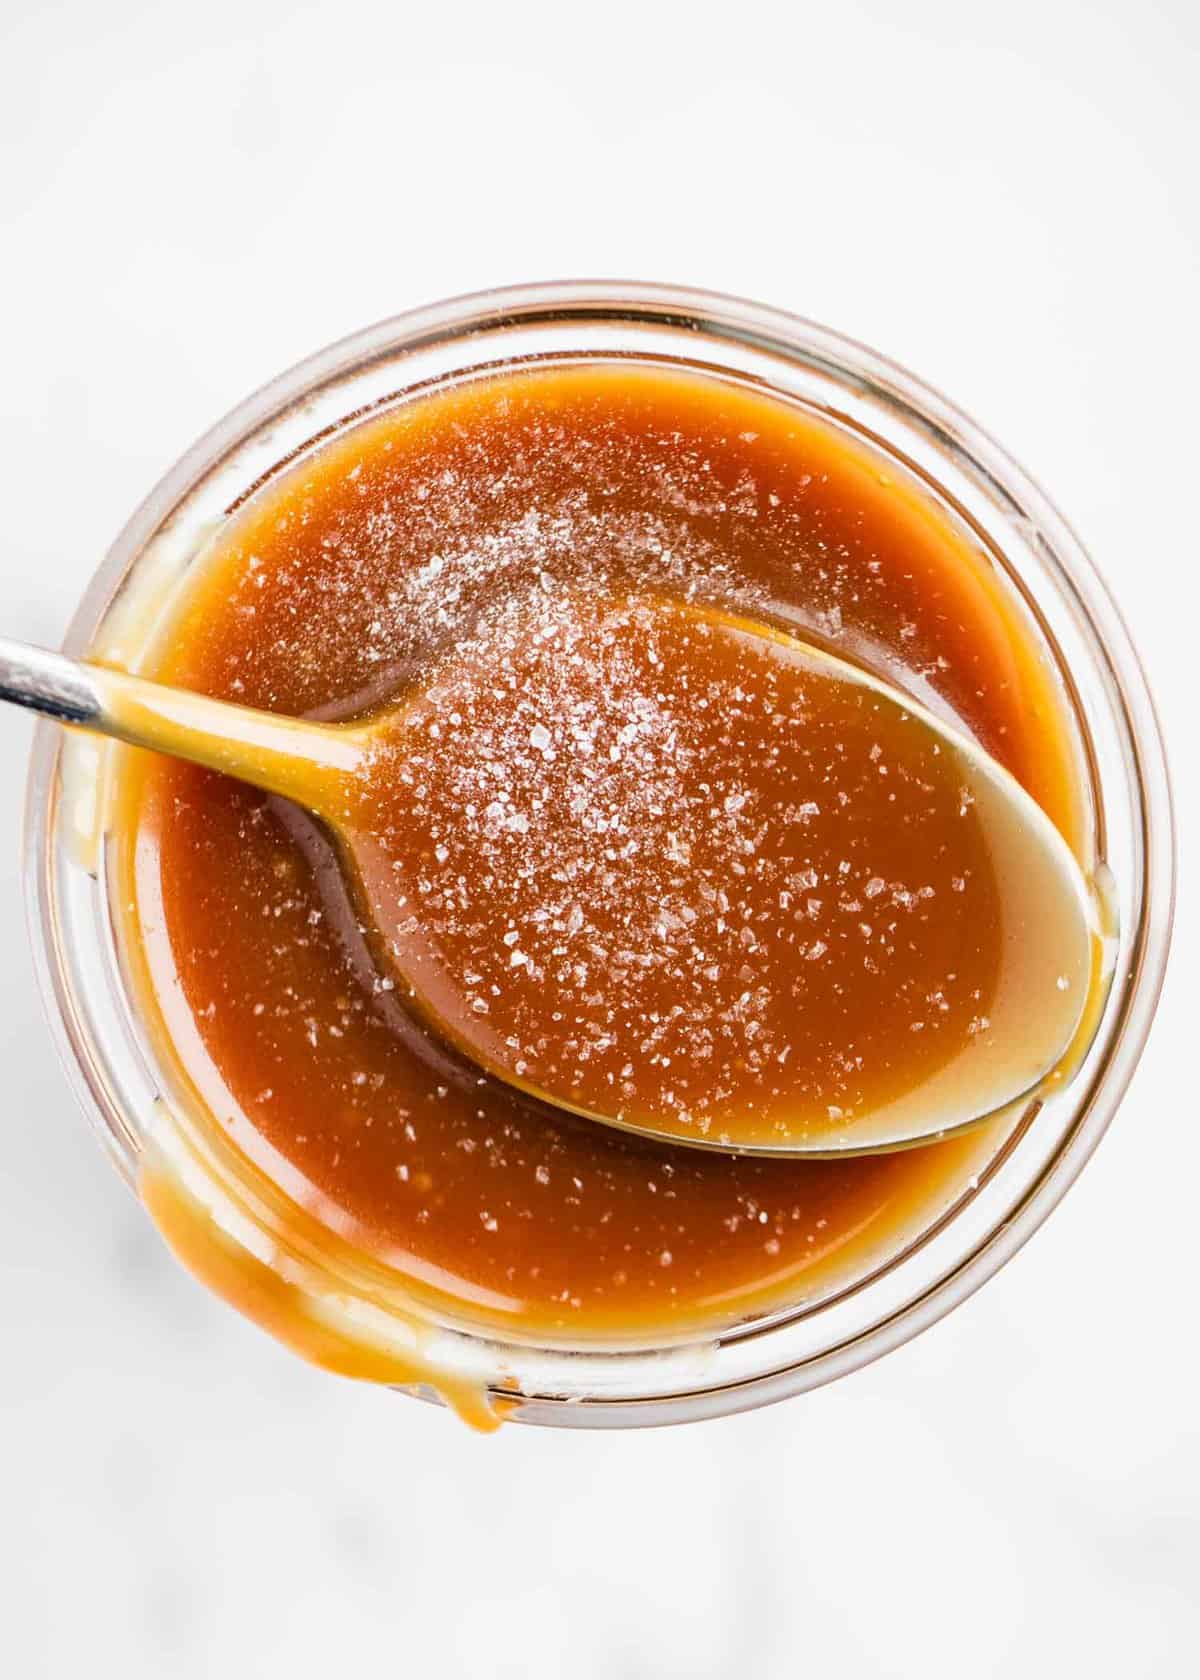 3 Ingredient Caramel Sauce Only 15 Minutes I Heart Naptime,Crochet Granny Square Patterns